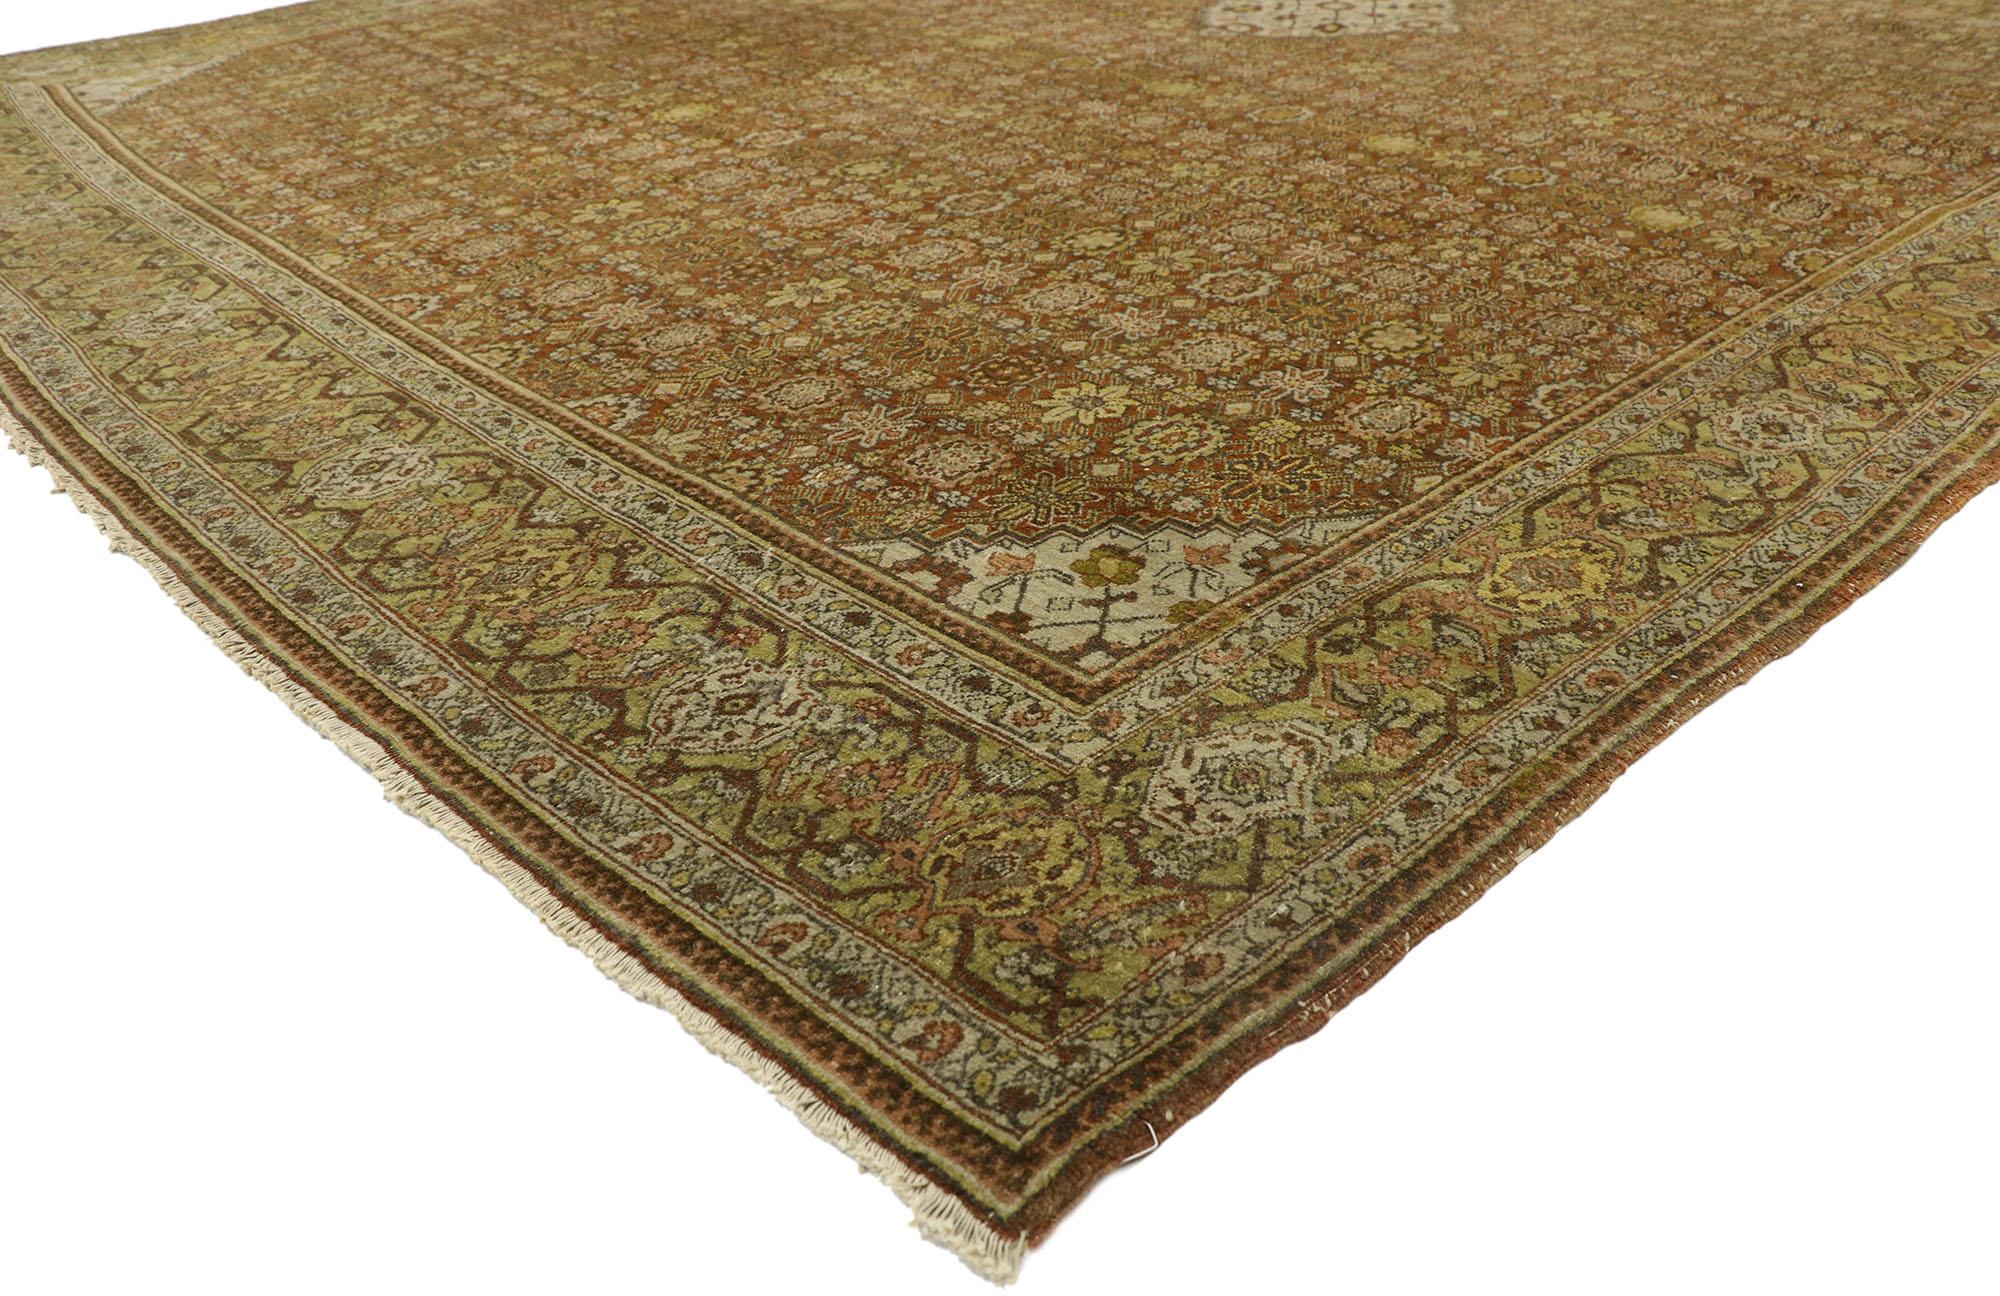 77394, antique Persian Tabriz rug with Arts & Crafts style. With its warm earth-tone colors and symmetrical composition, this hand knotted wool vintage Persian Tabriz rug astounds with its beauty. It features a stepped lozenge central medallion